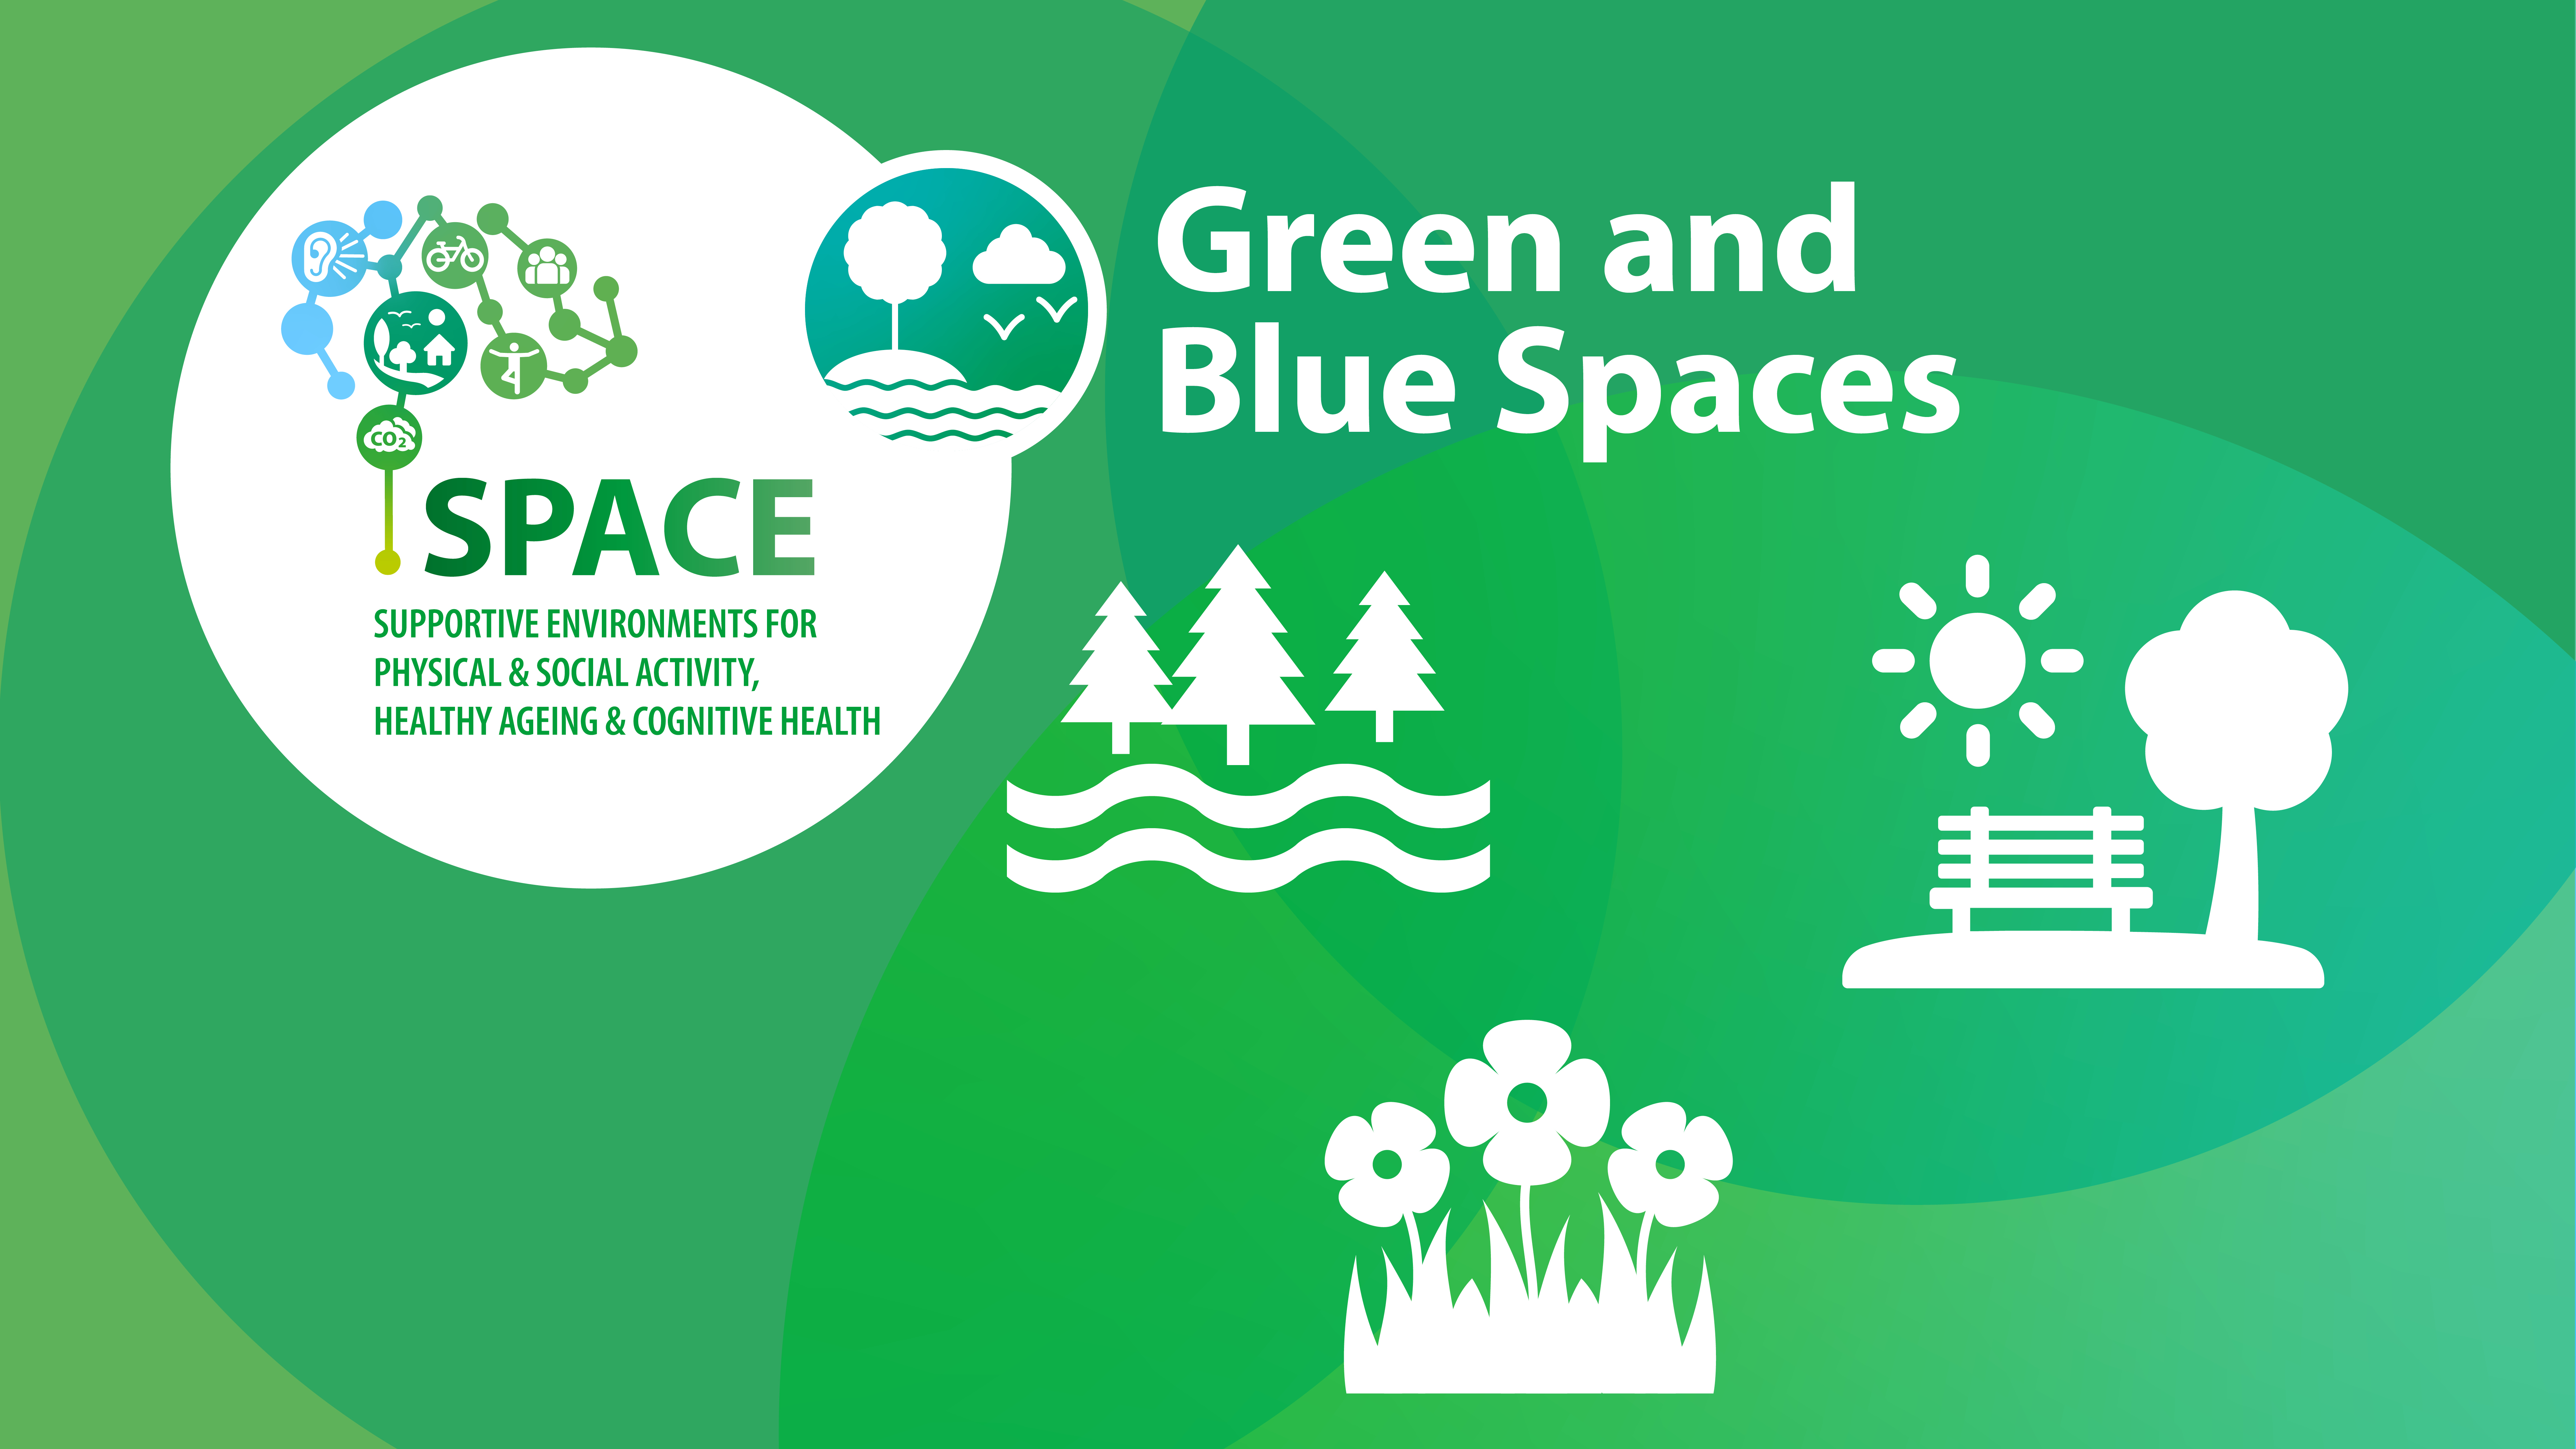 Green and Blue Spaces - dark